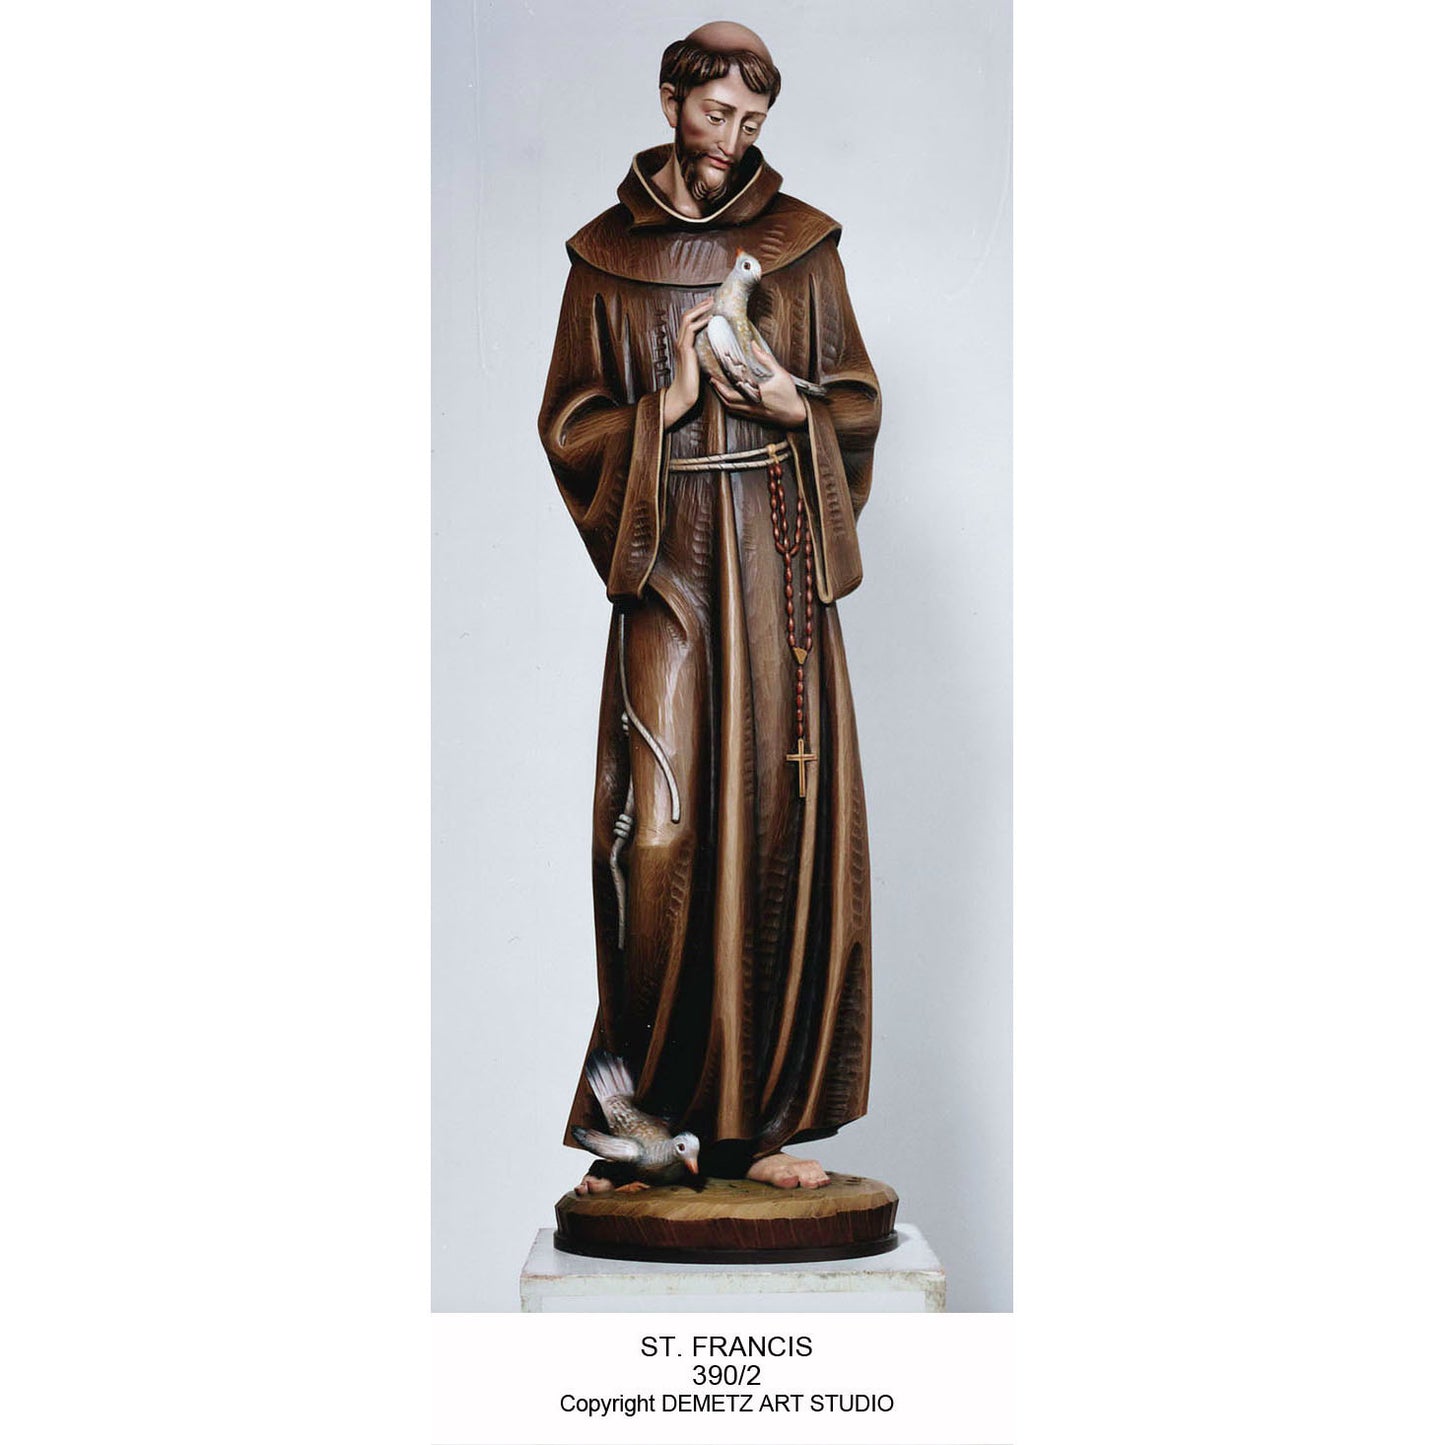 Demetz - St Francis of Assisi | 390/2